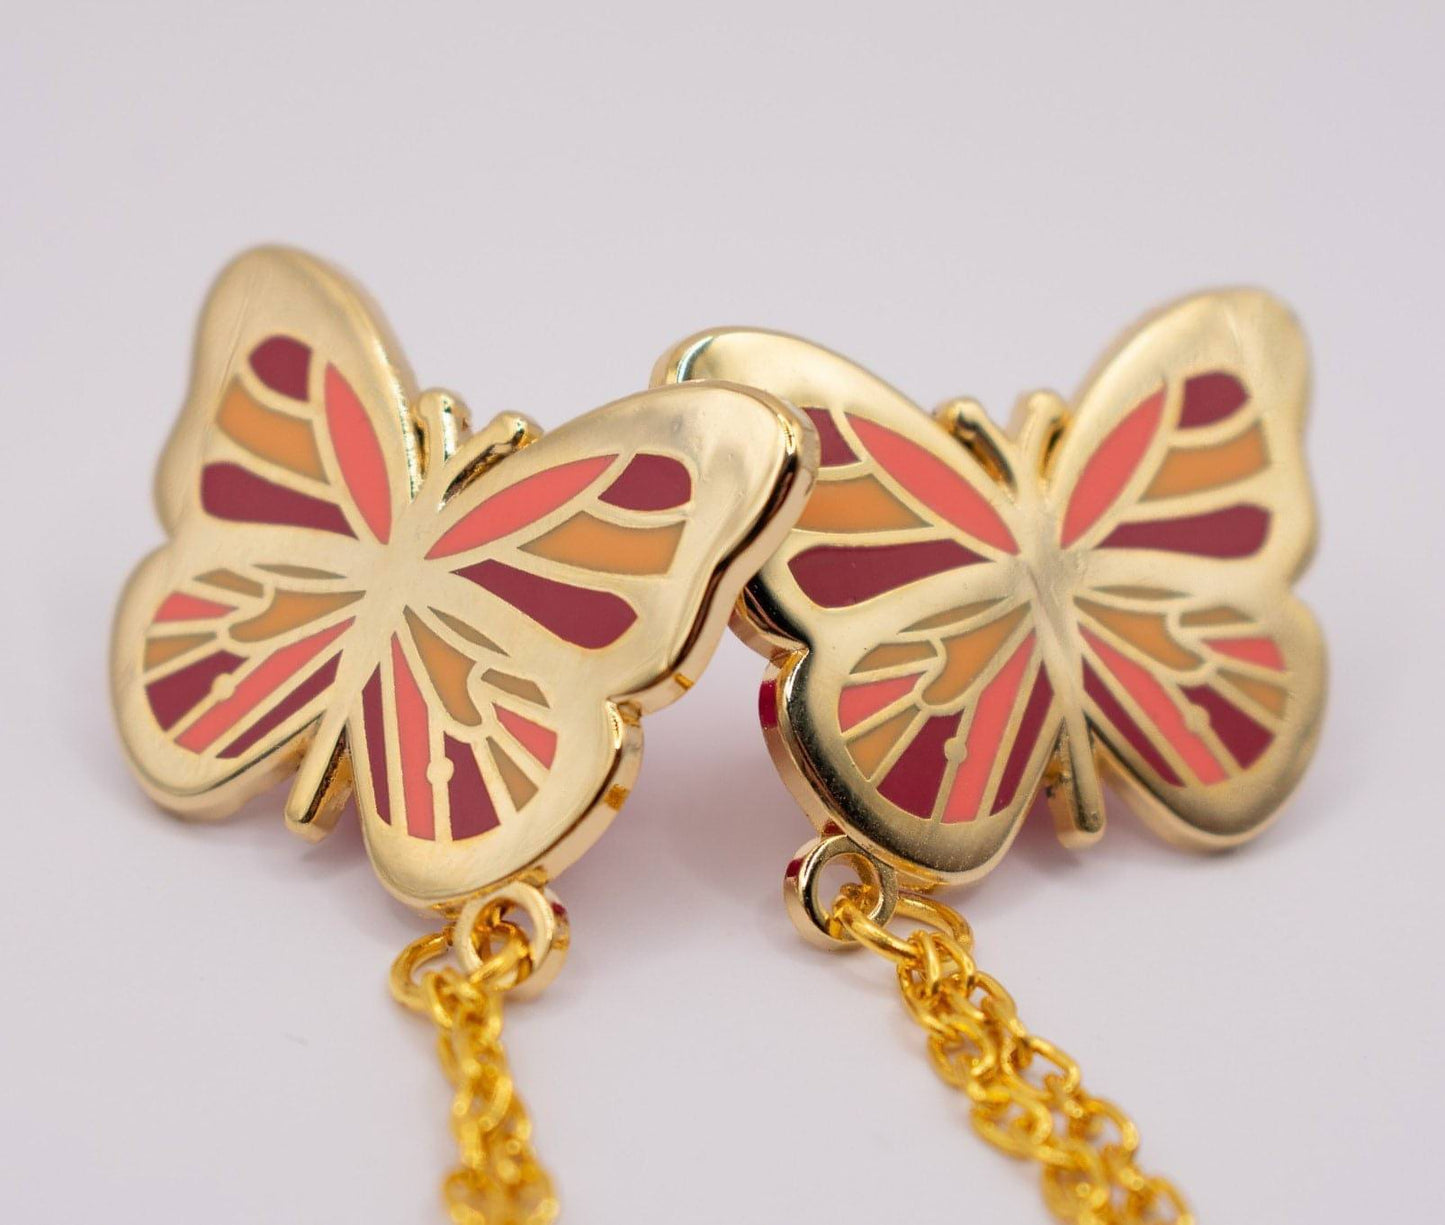 This picture shows the butterfly collar pin (which is two butterfly pins connected by chains). In this image is the pink variant, which means the wing colours are various shares of pink and orange. The metal of the pin is a shiny gold.